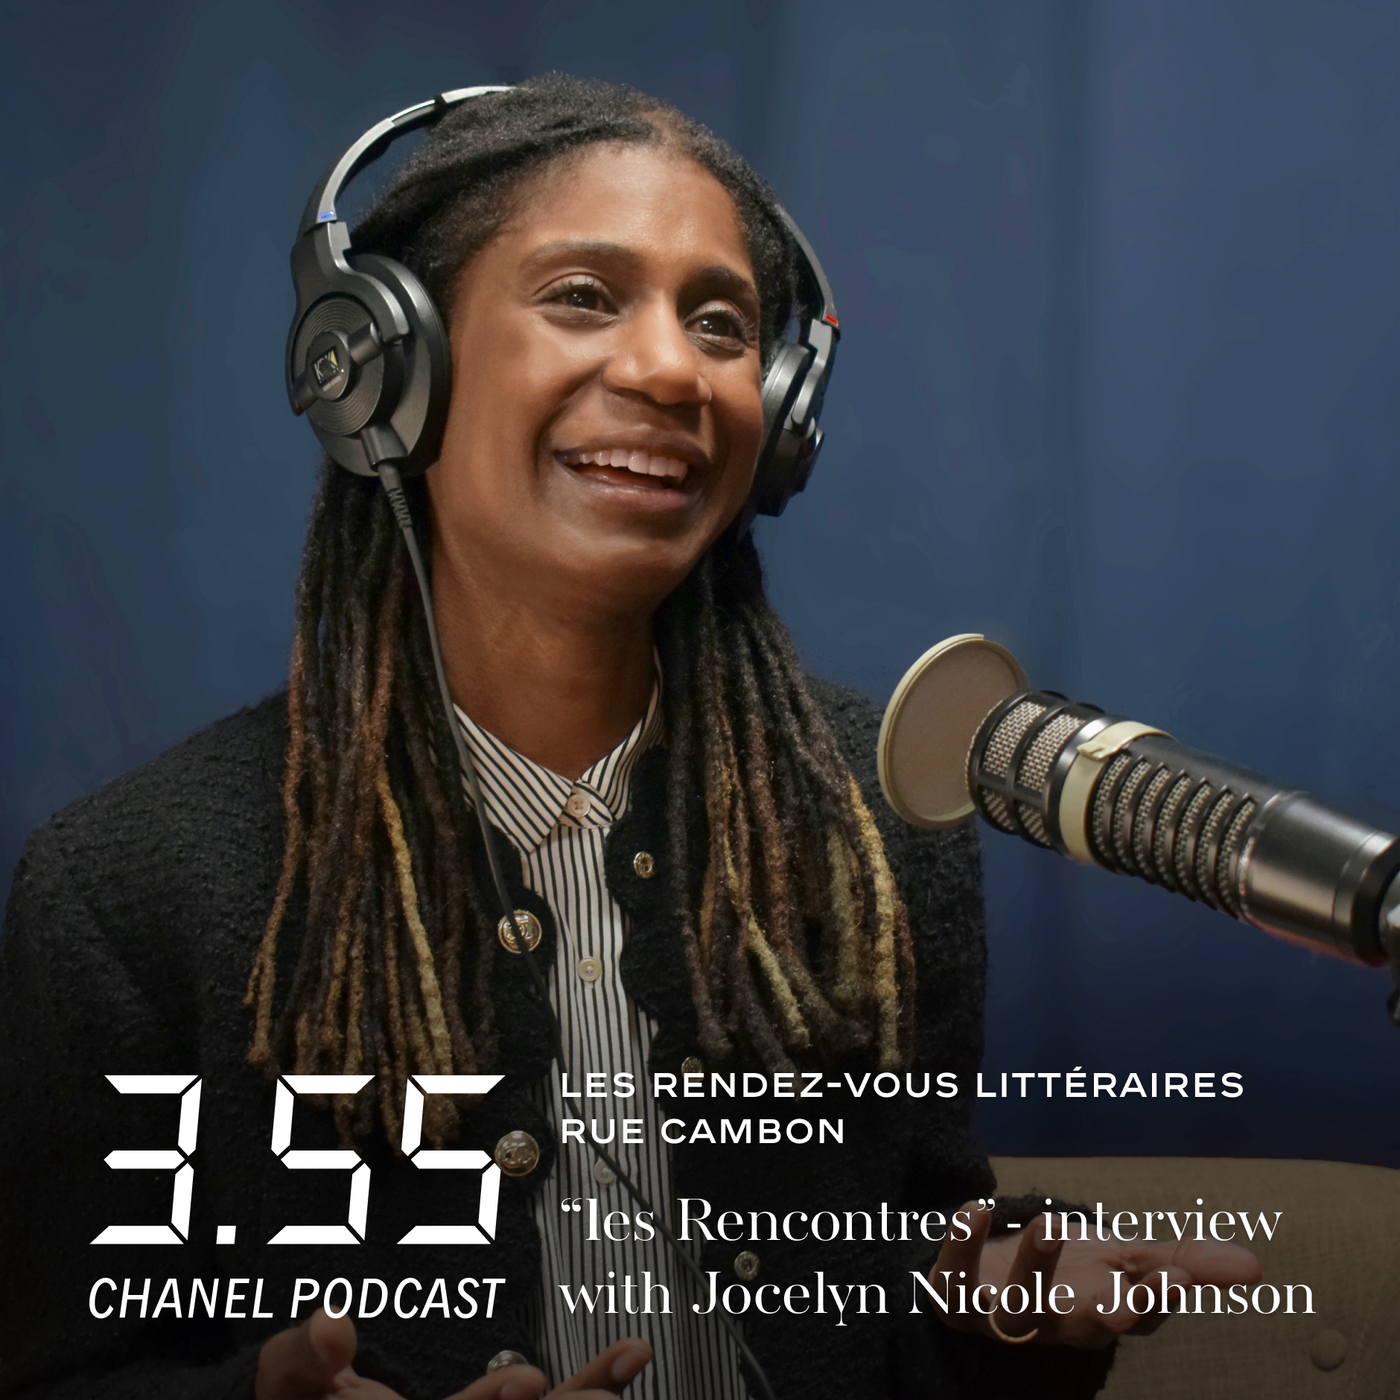 Interview with Jocelyn Nicole Johnson — ”les Rencontres”